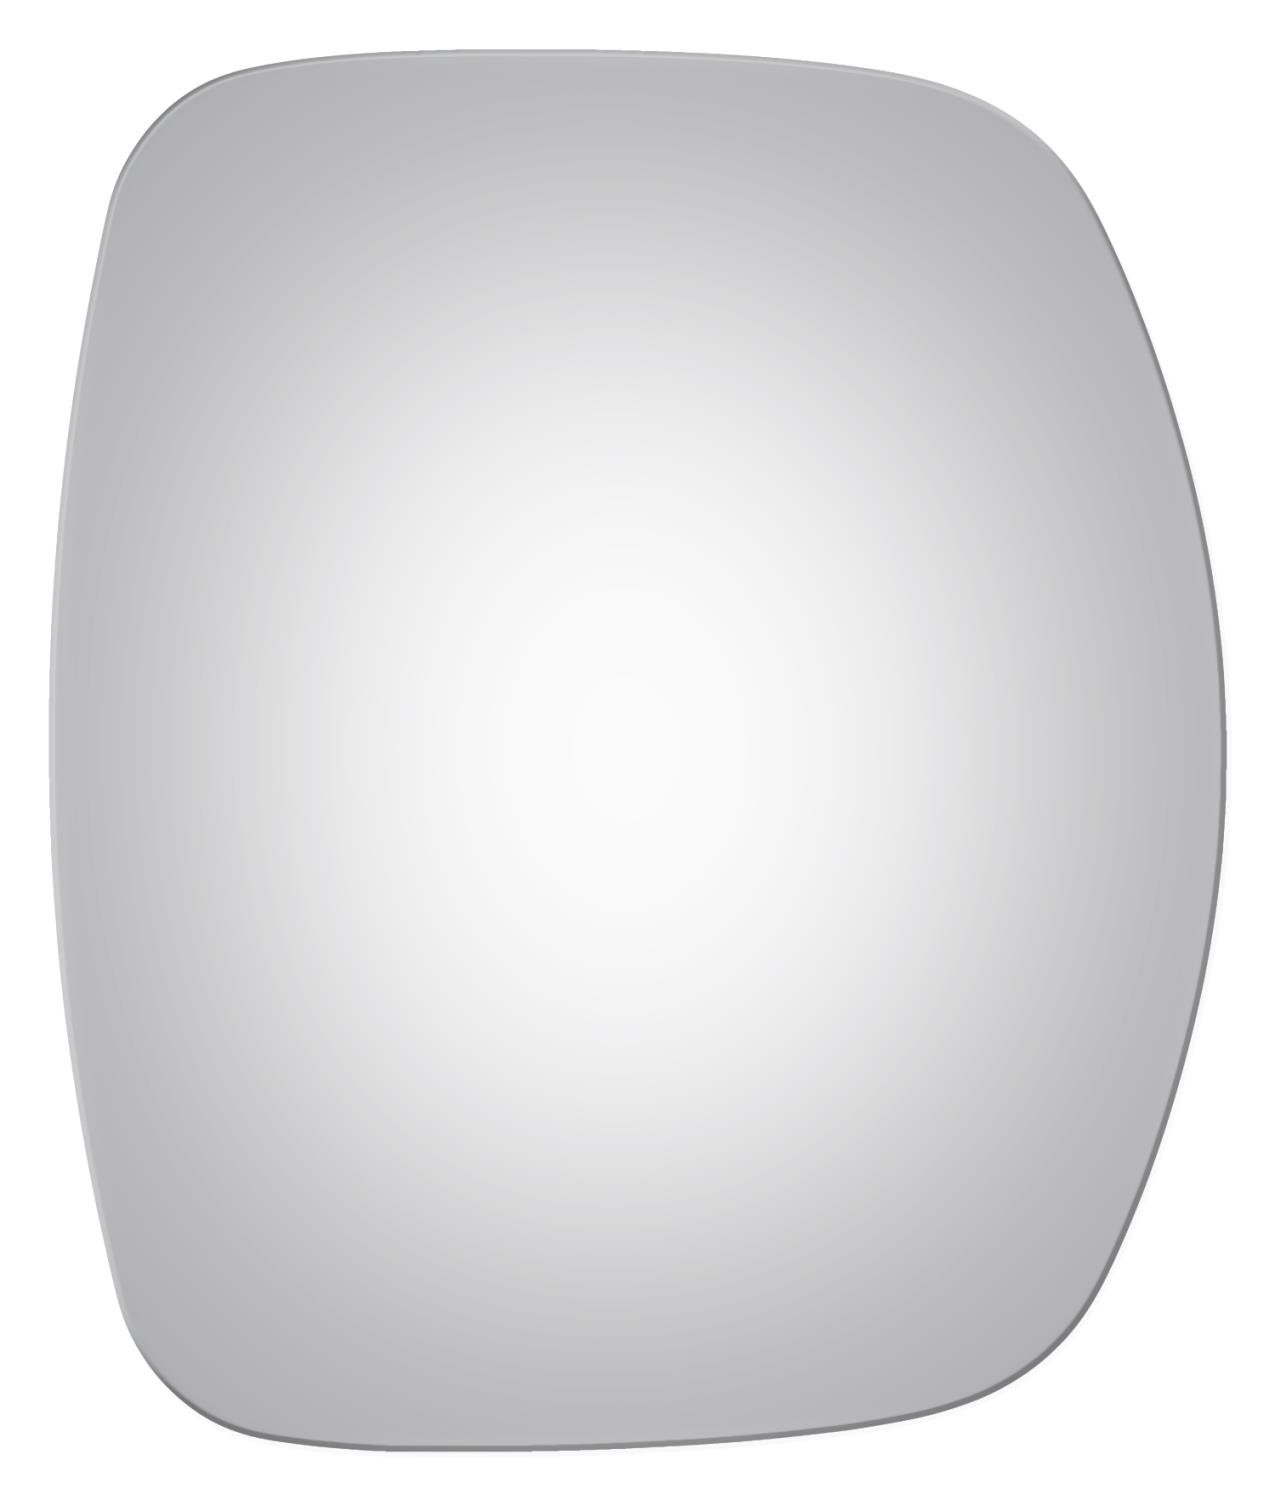 2954 SIDE VIEW MIRROR